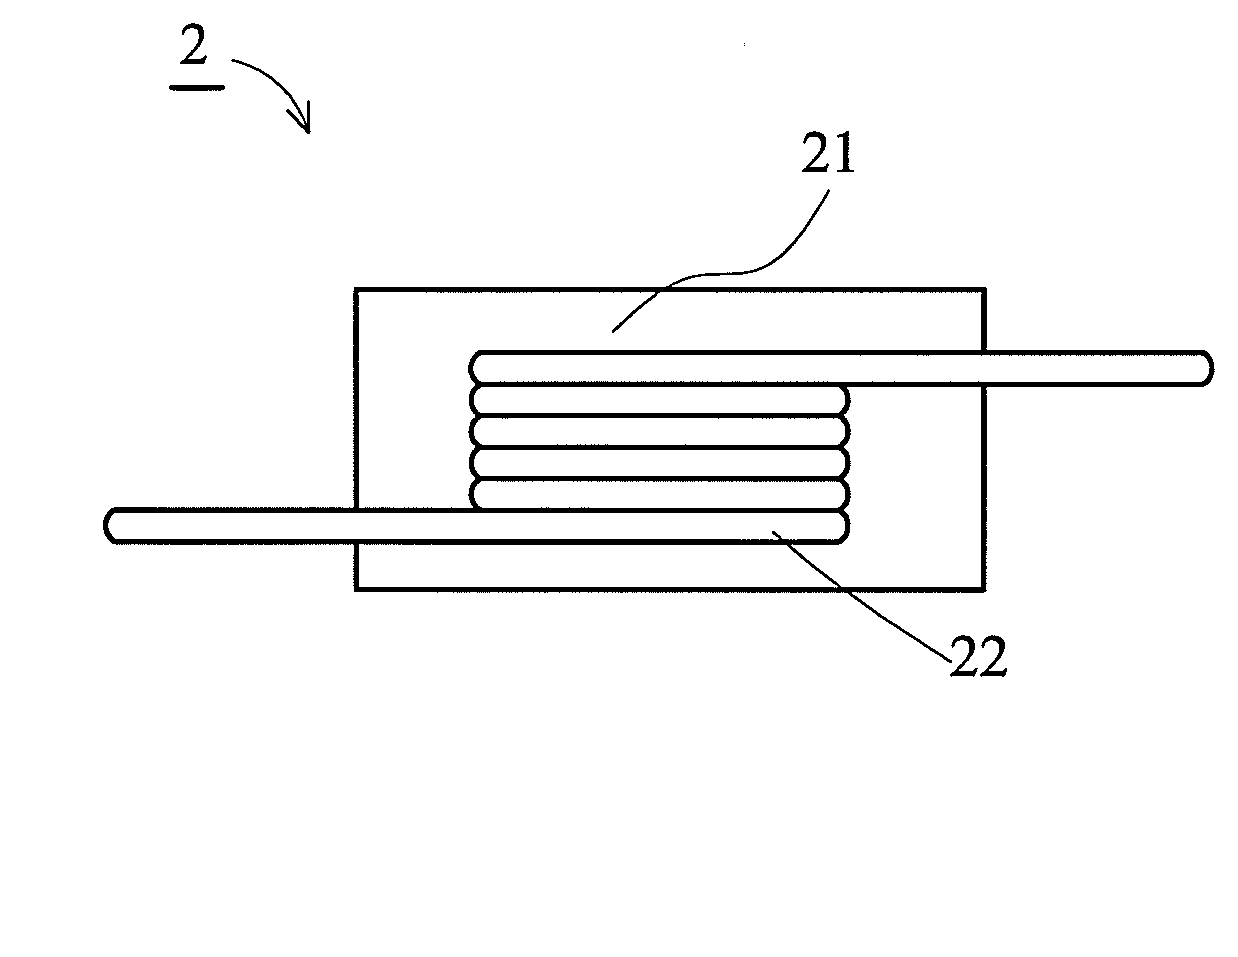 Inductor and core thereof